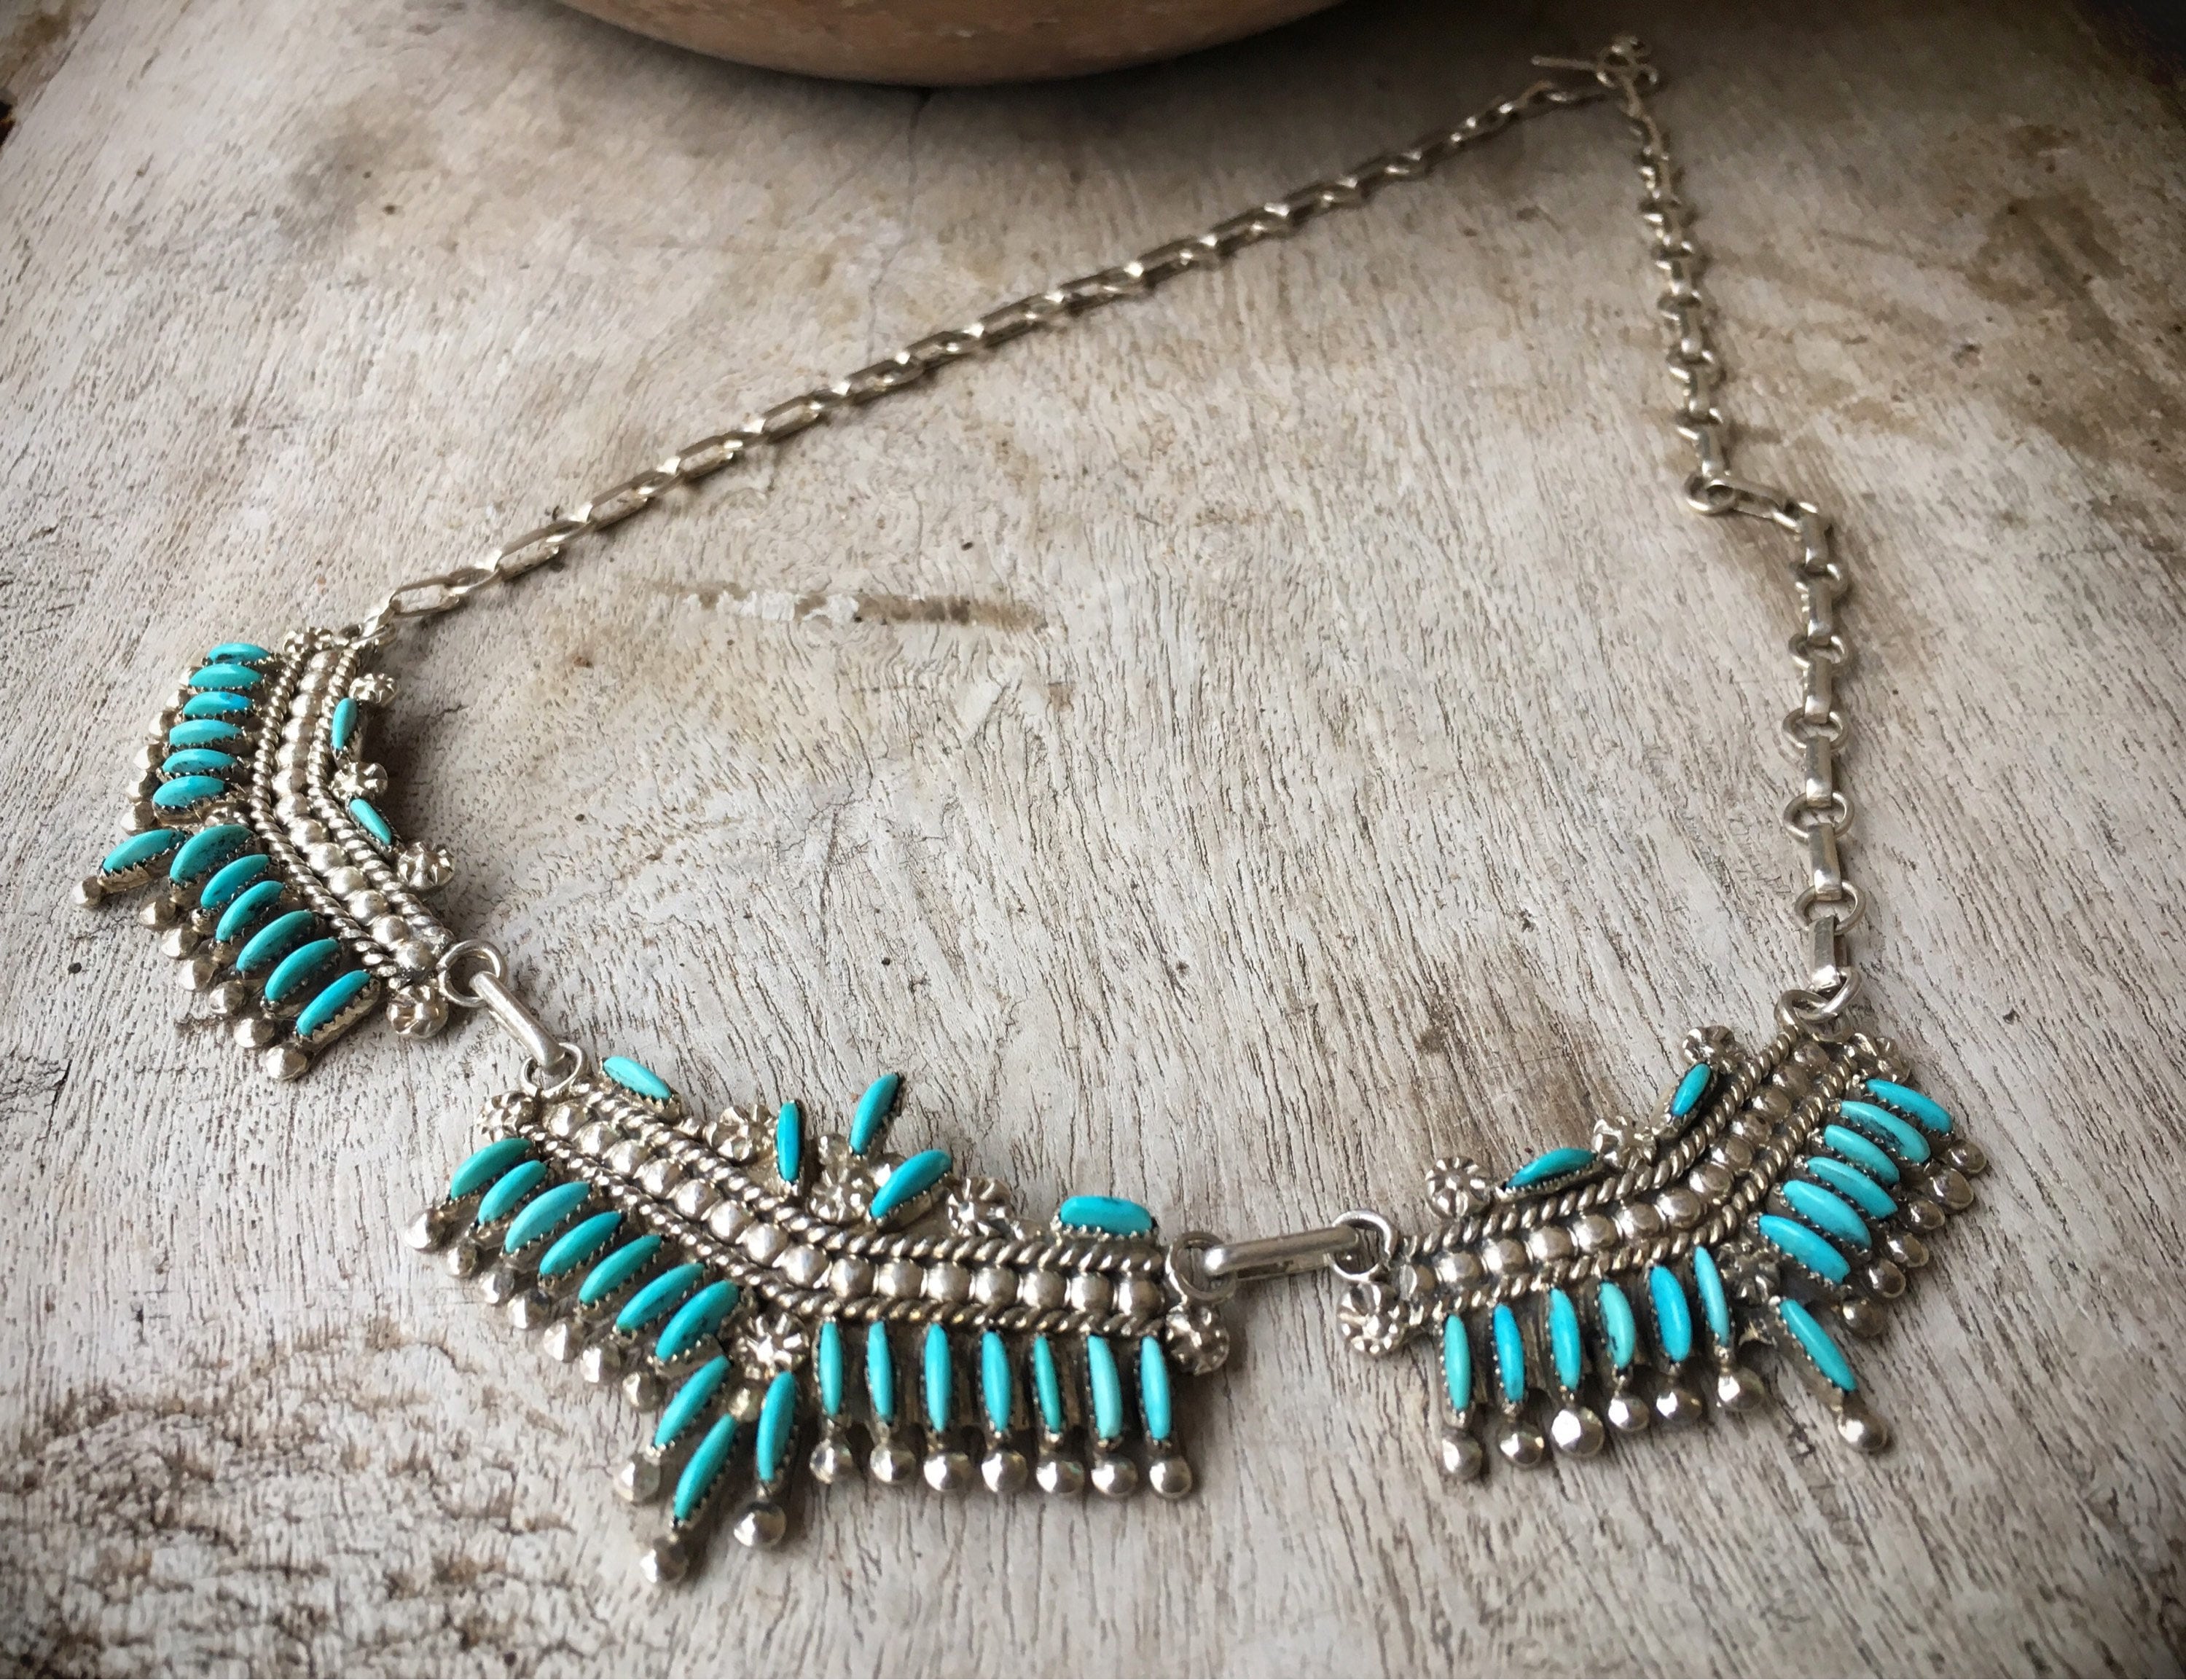 Zuni Jewelry Sterling Silver Turquoise Necklace, Native American Indian